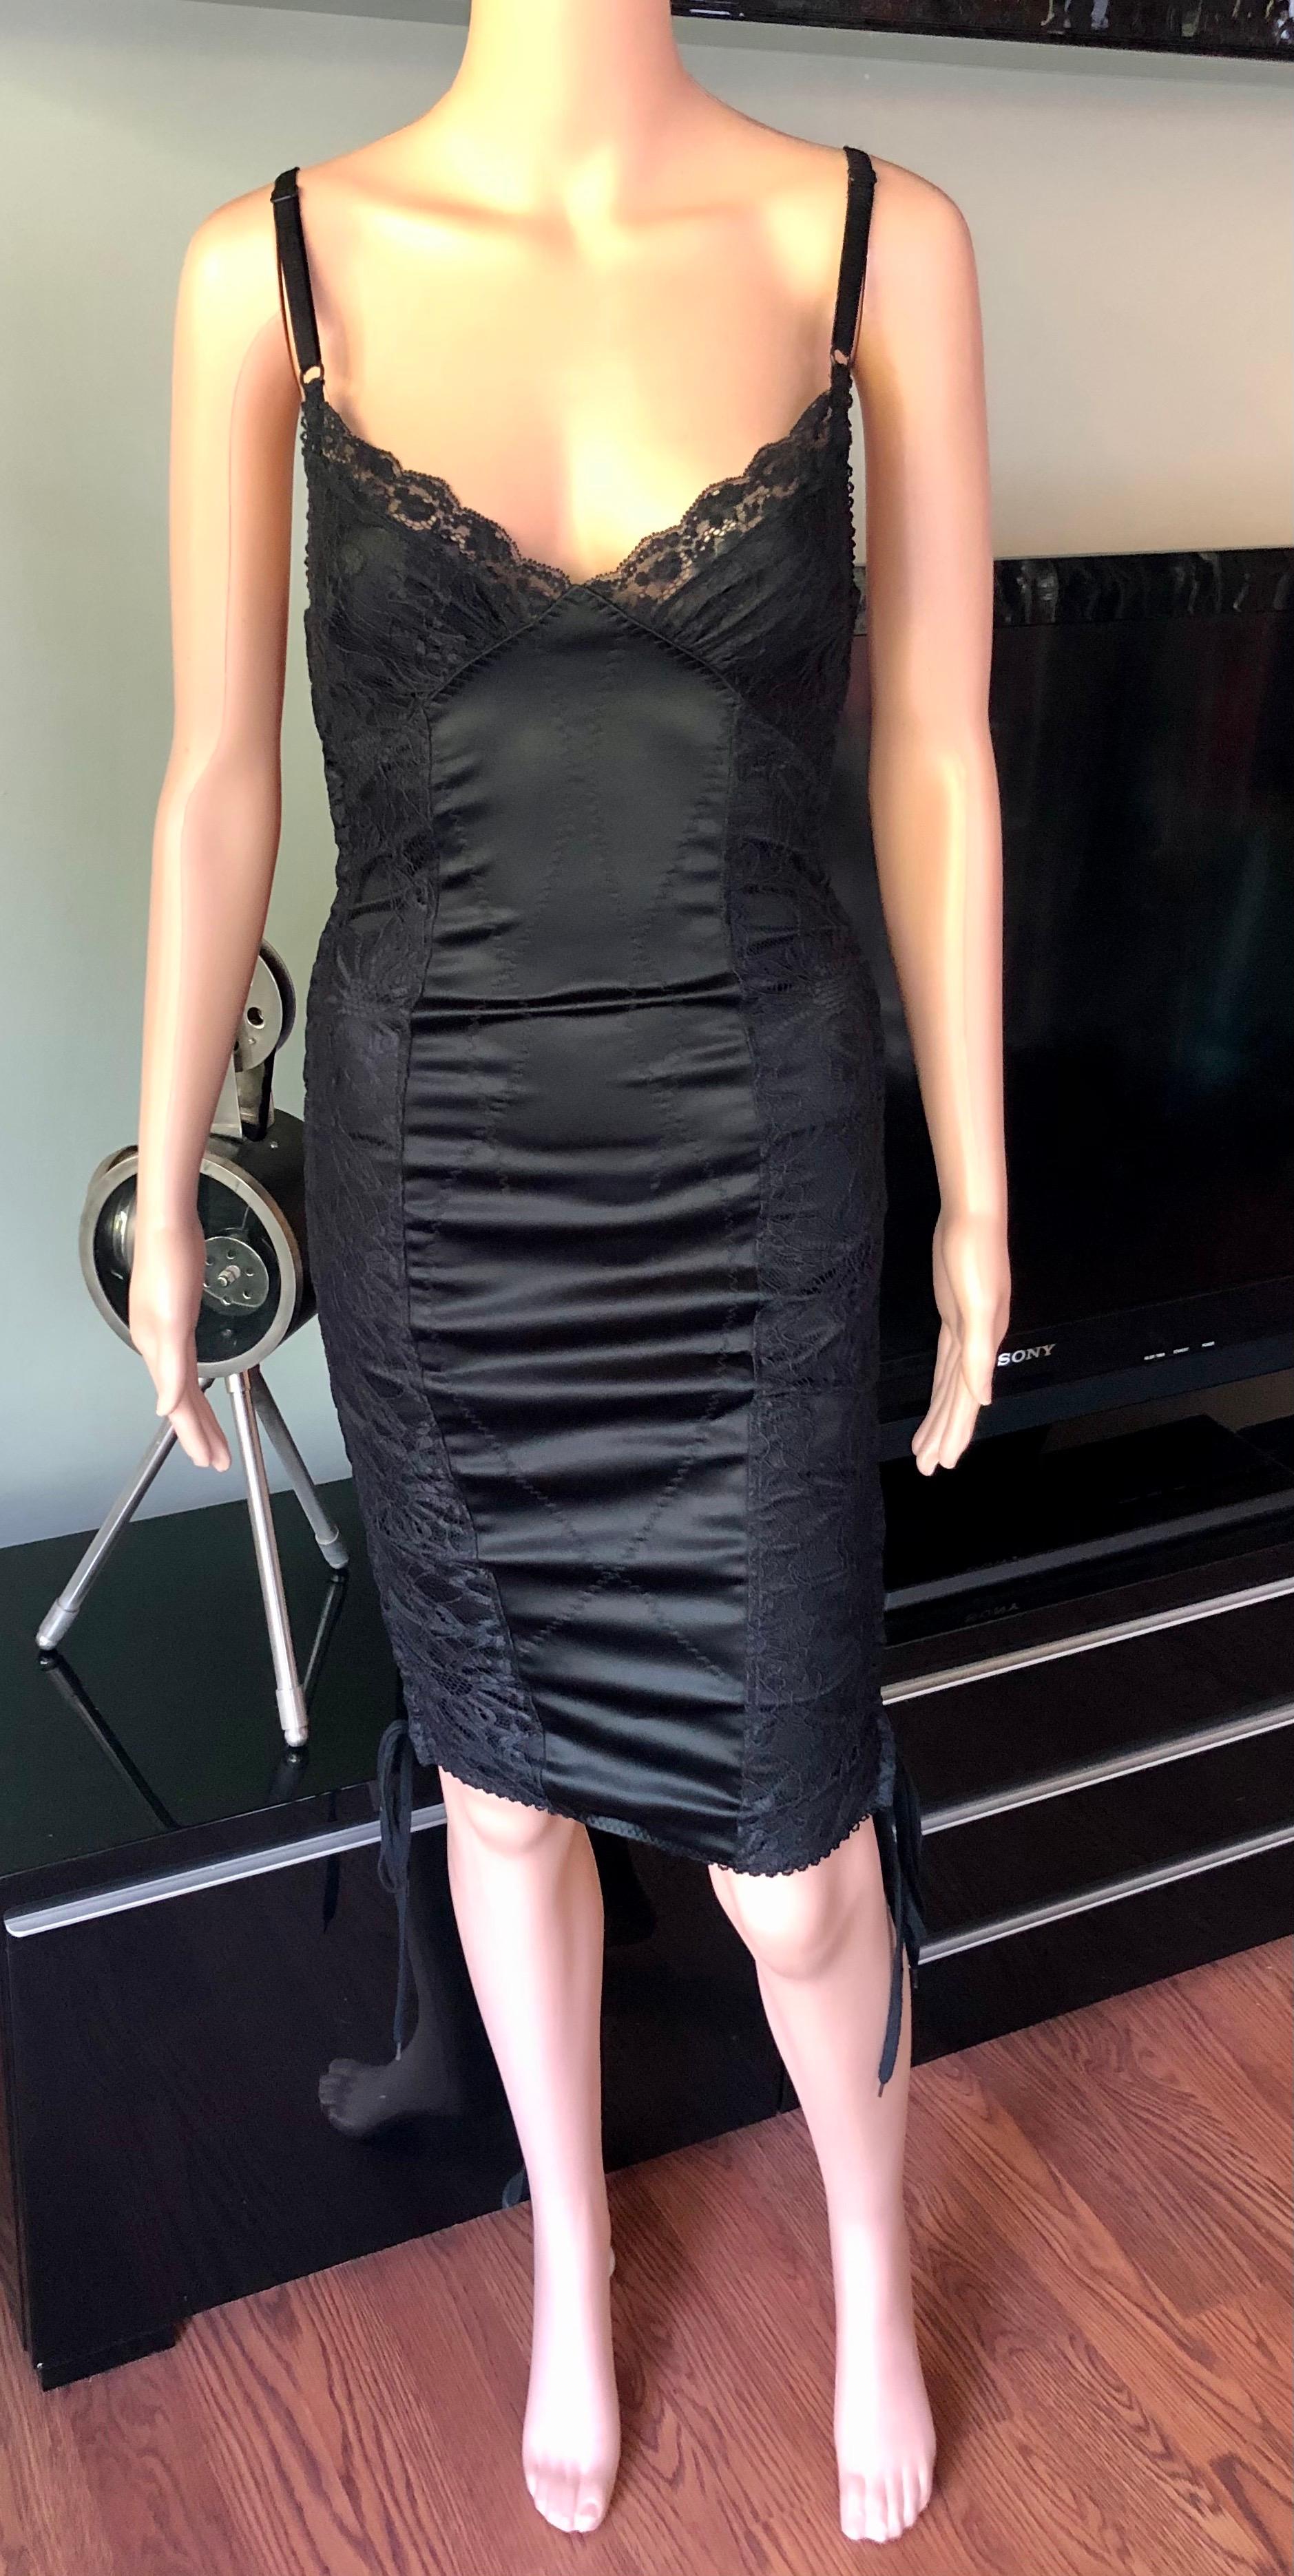 D&G by Dolce & Gabbana Lace Up Bodycon Black Dress For Sale 2